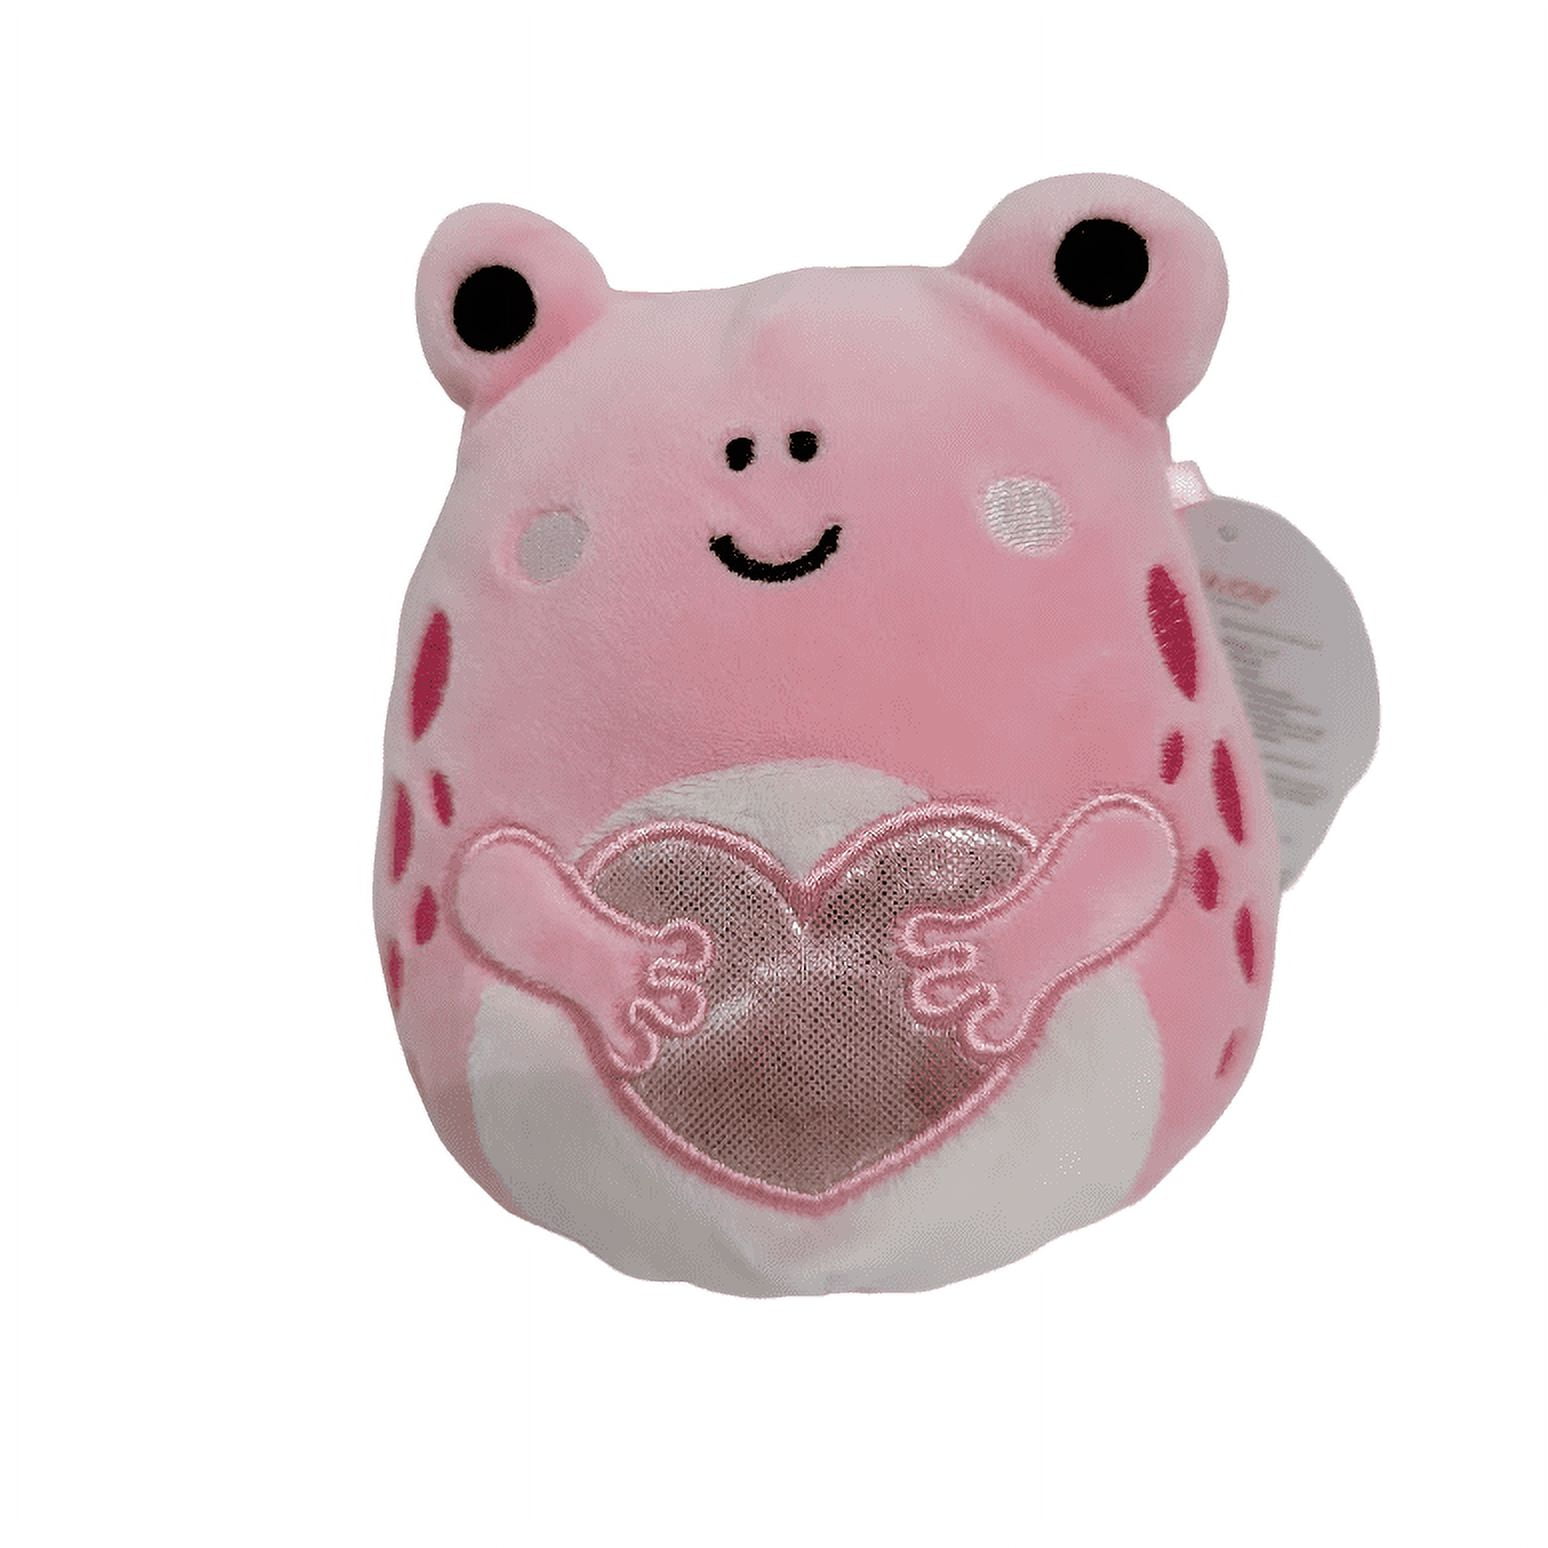 Squishmallows Official Kellytoys Plush 4.5 Inch Lonina the Pink